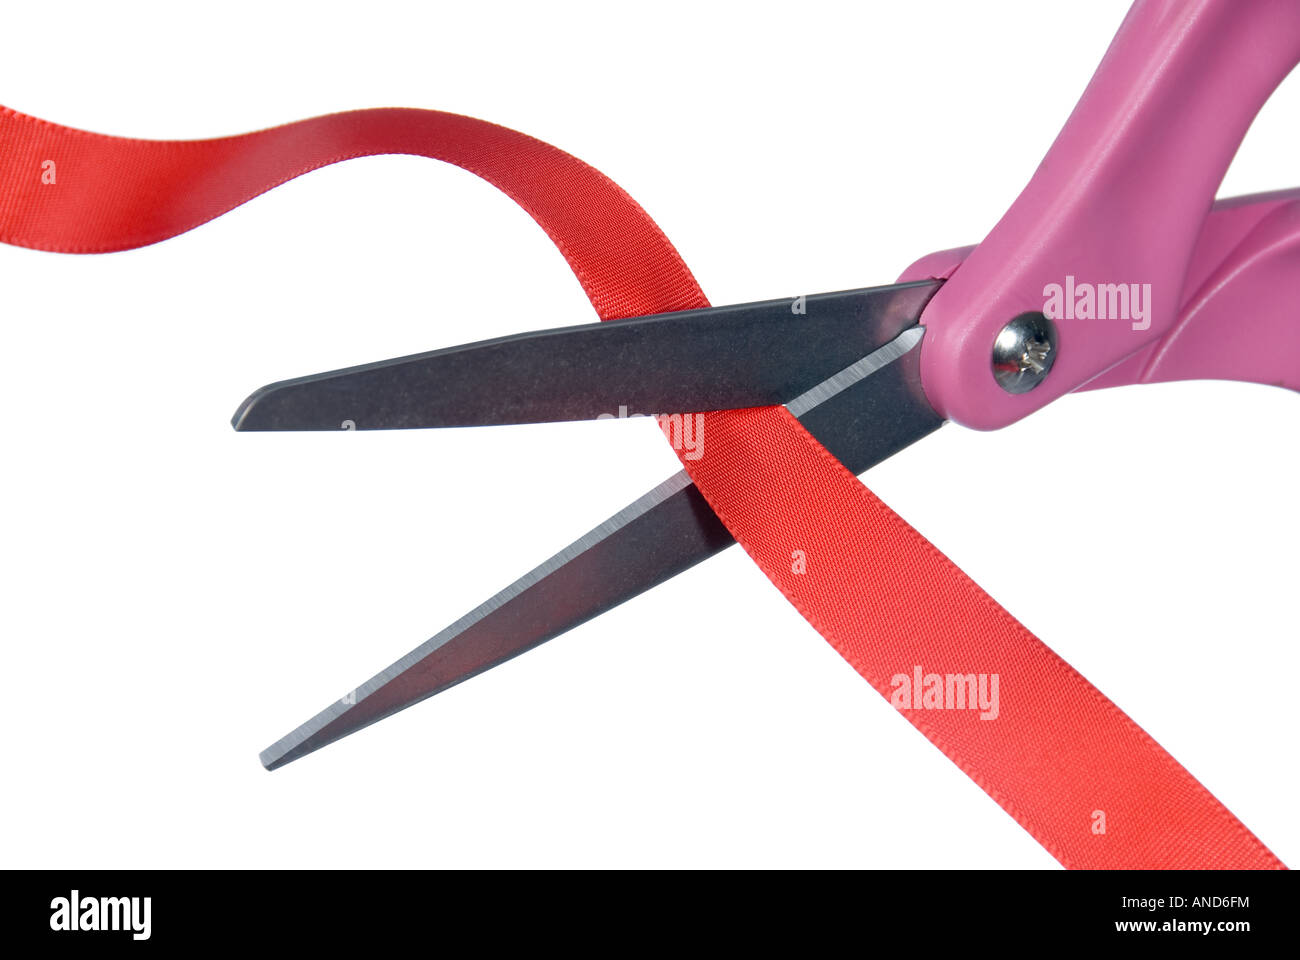 Close up image of an isolated pair of scissors cutting into red ribbon Stock Photo